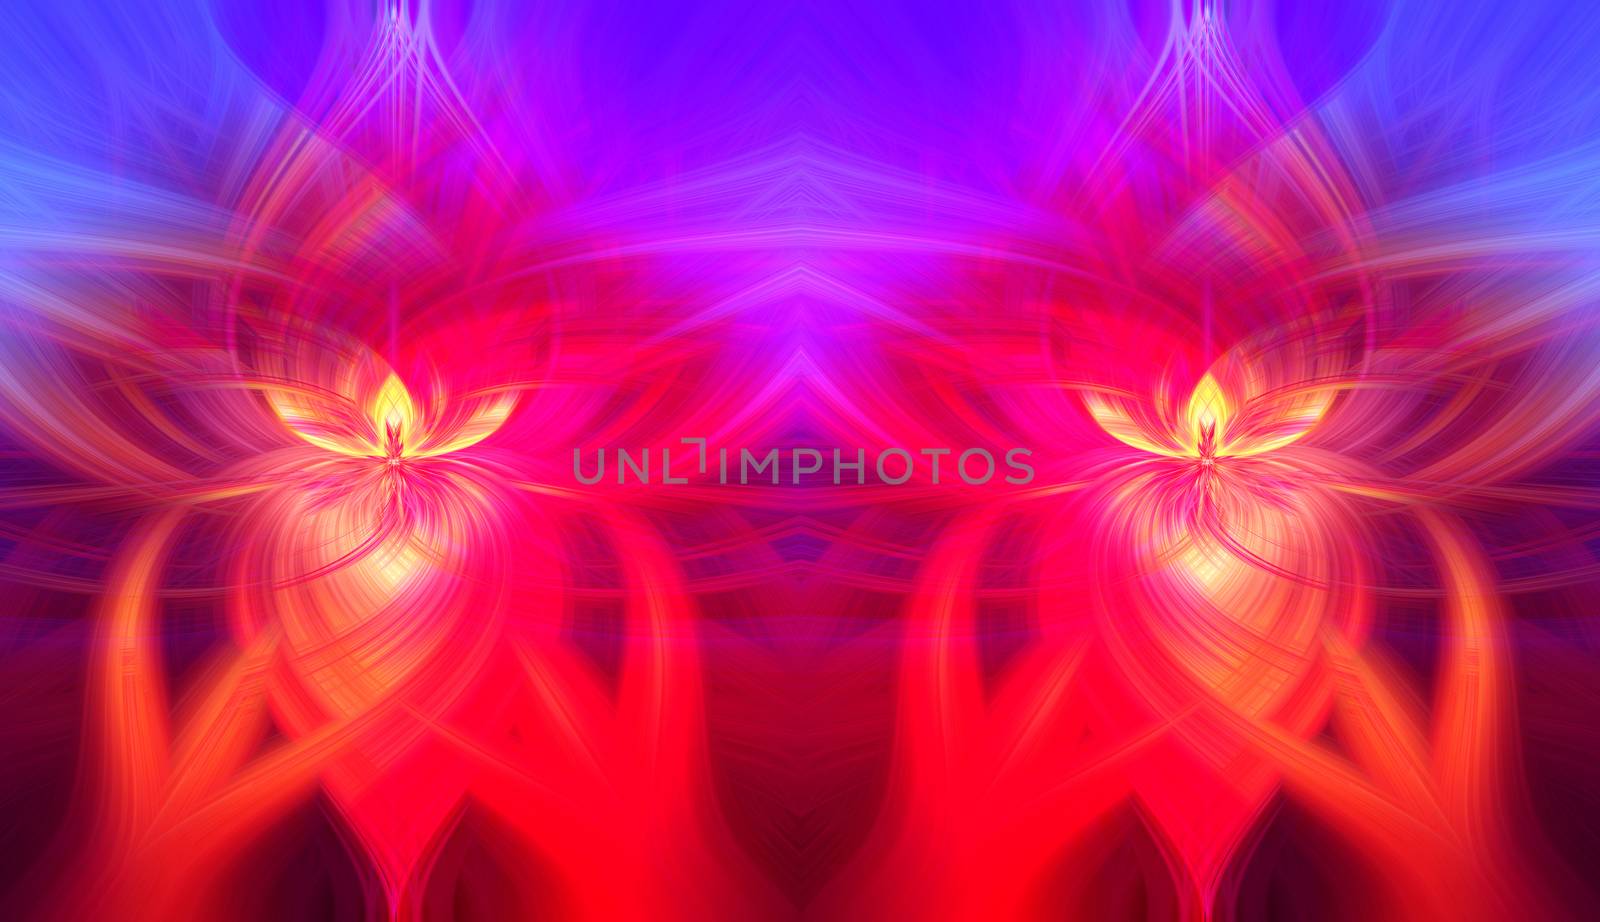 Beautiful abstract intertwined symmetrical 3d fibers forming a shape of sparkle, flame, flower, interlinked hearts. Pink, red, blue, maroon, yellow, and purple colors. Illustration.